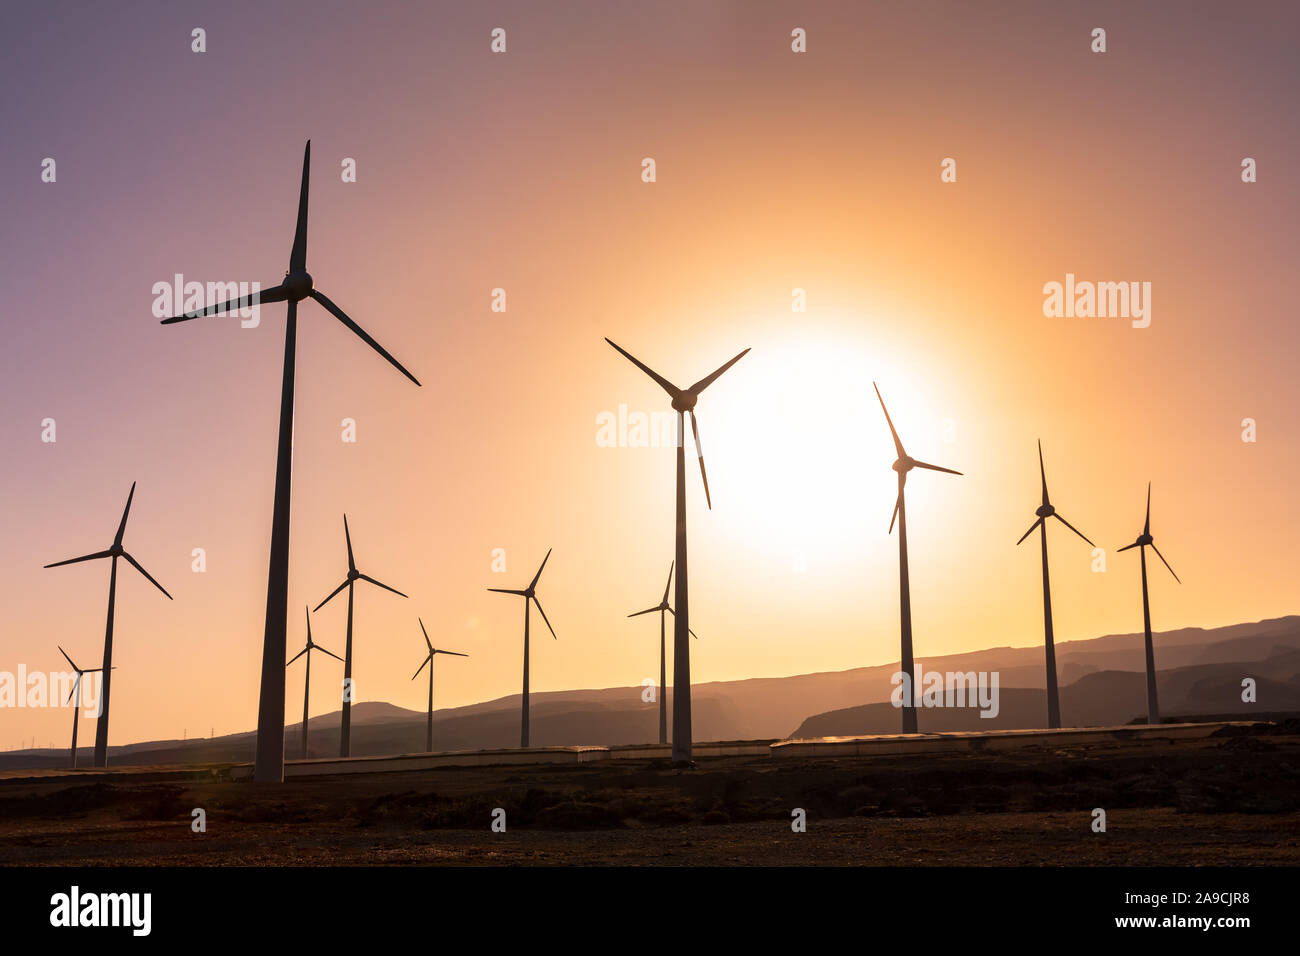 Wind turbine farm at sunset producing renewable energy, several windmill generating clean ecological electricity, sustainable development Stock Photo